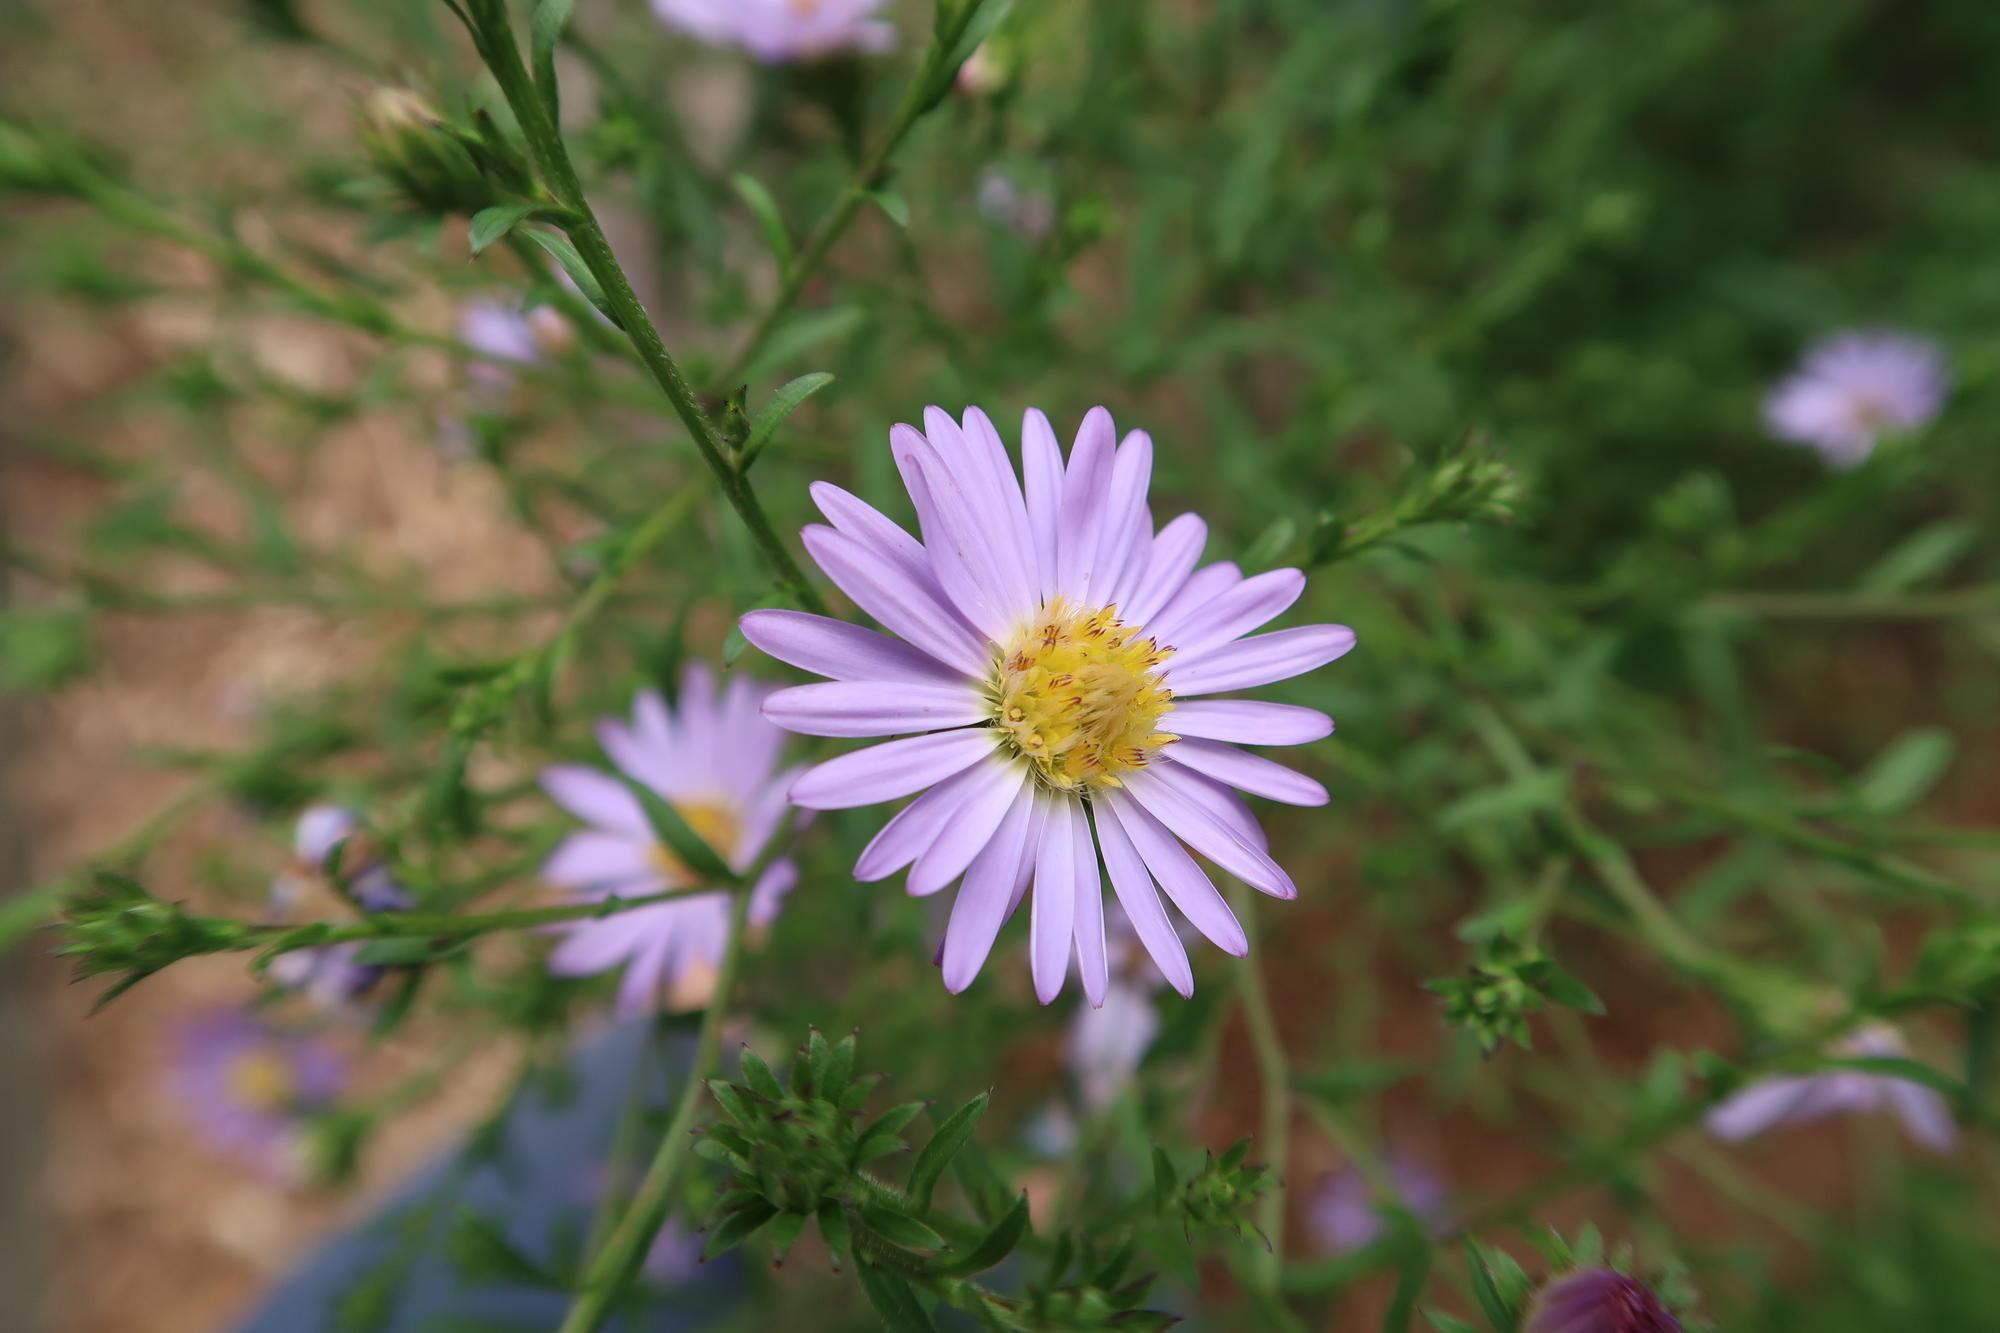 light purple daisy-like flower with small yellow center. Several petals overlap in ray.